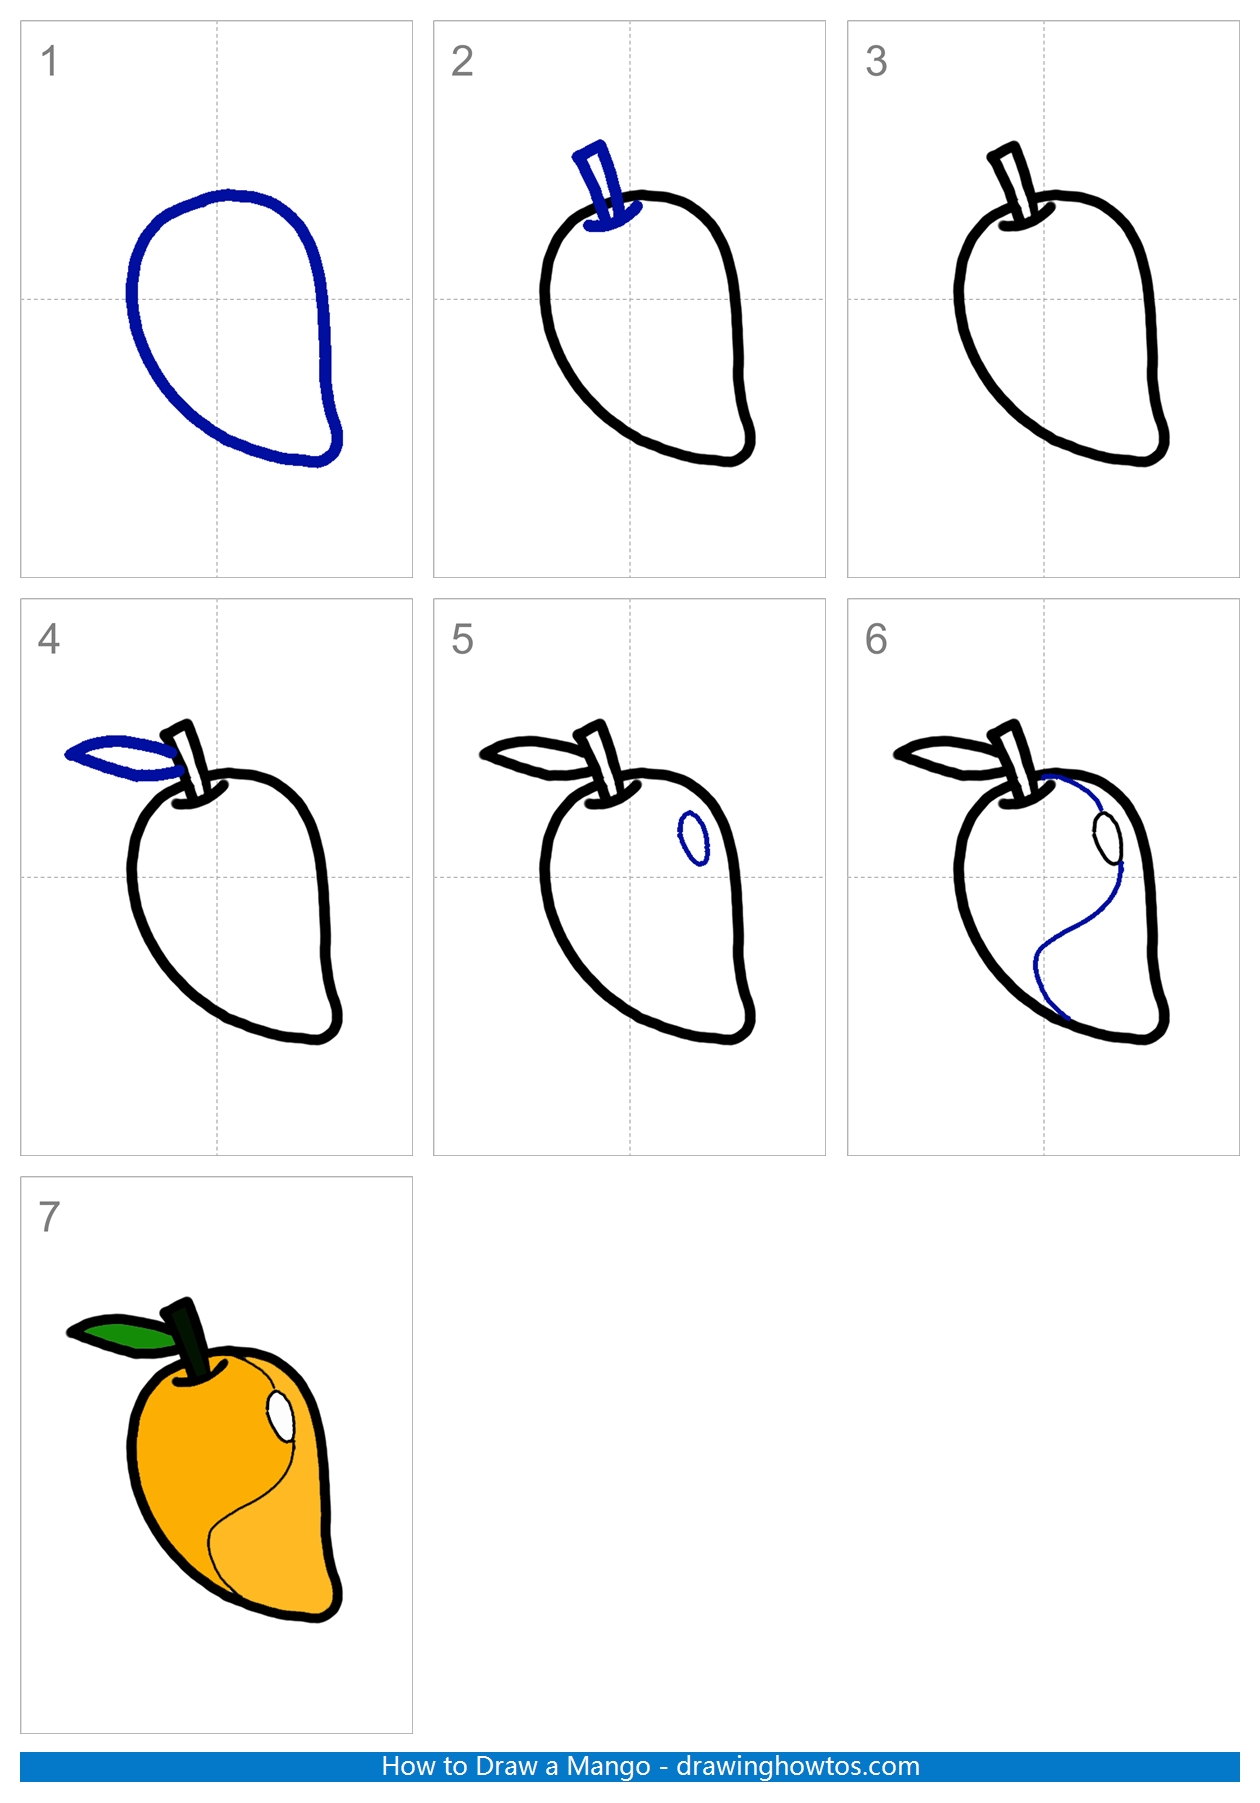 How to Draw a Mango Step by Step